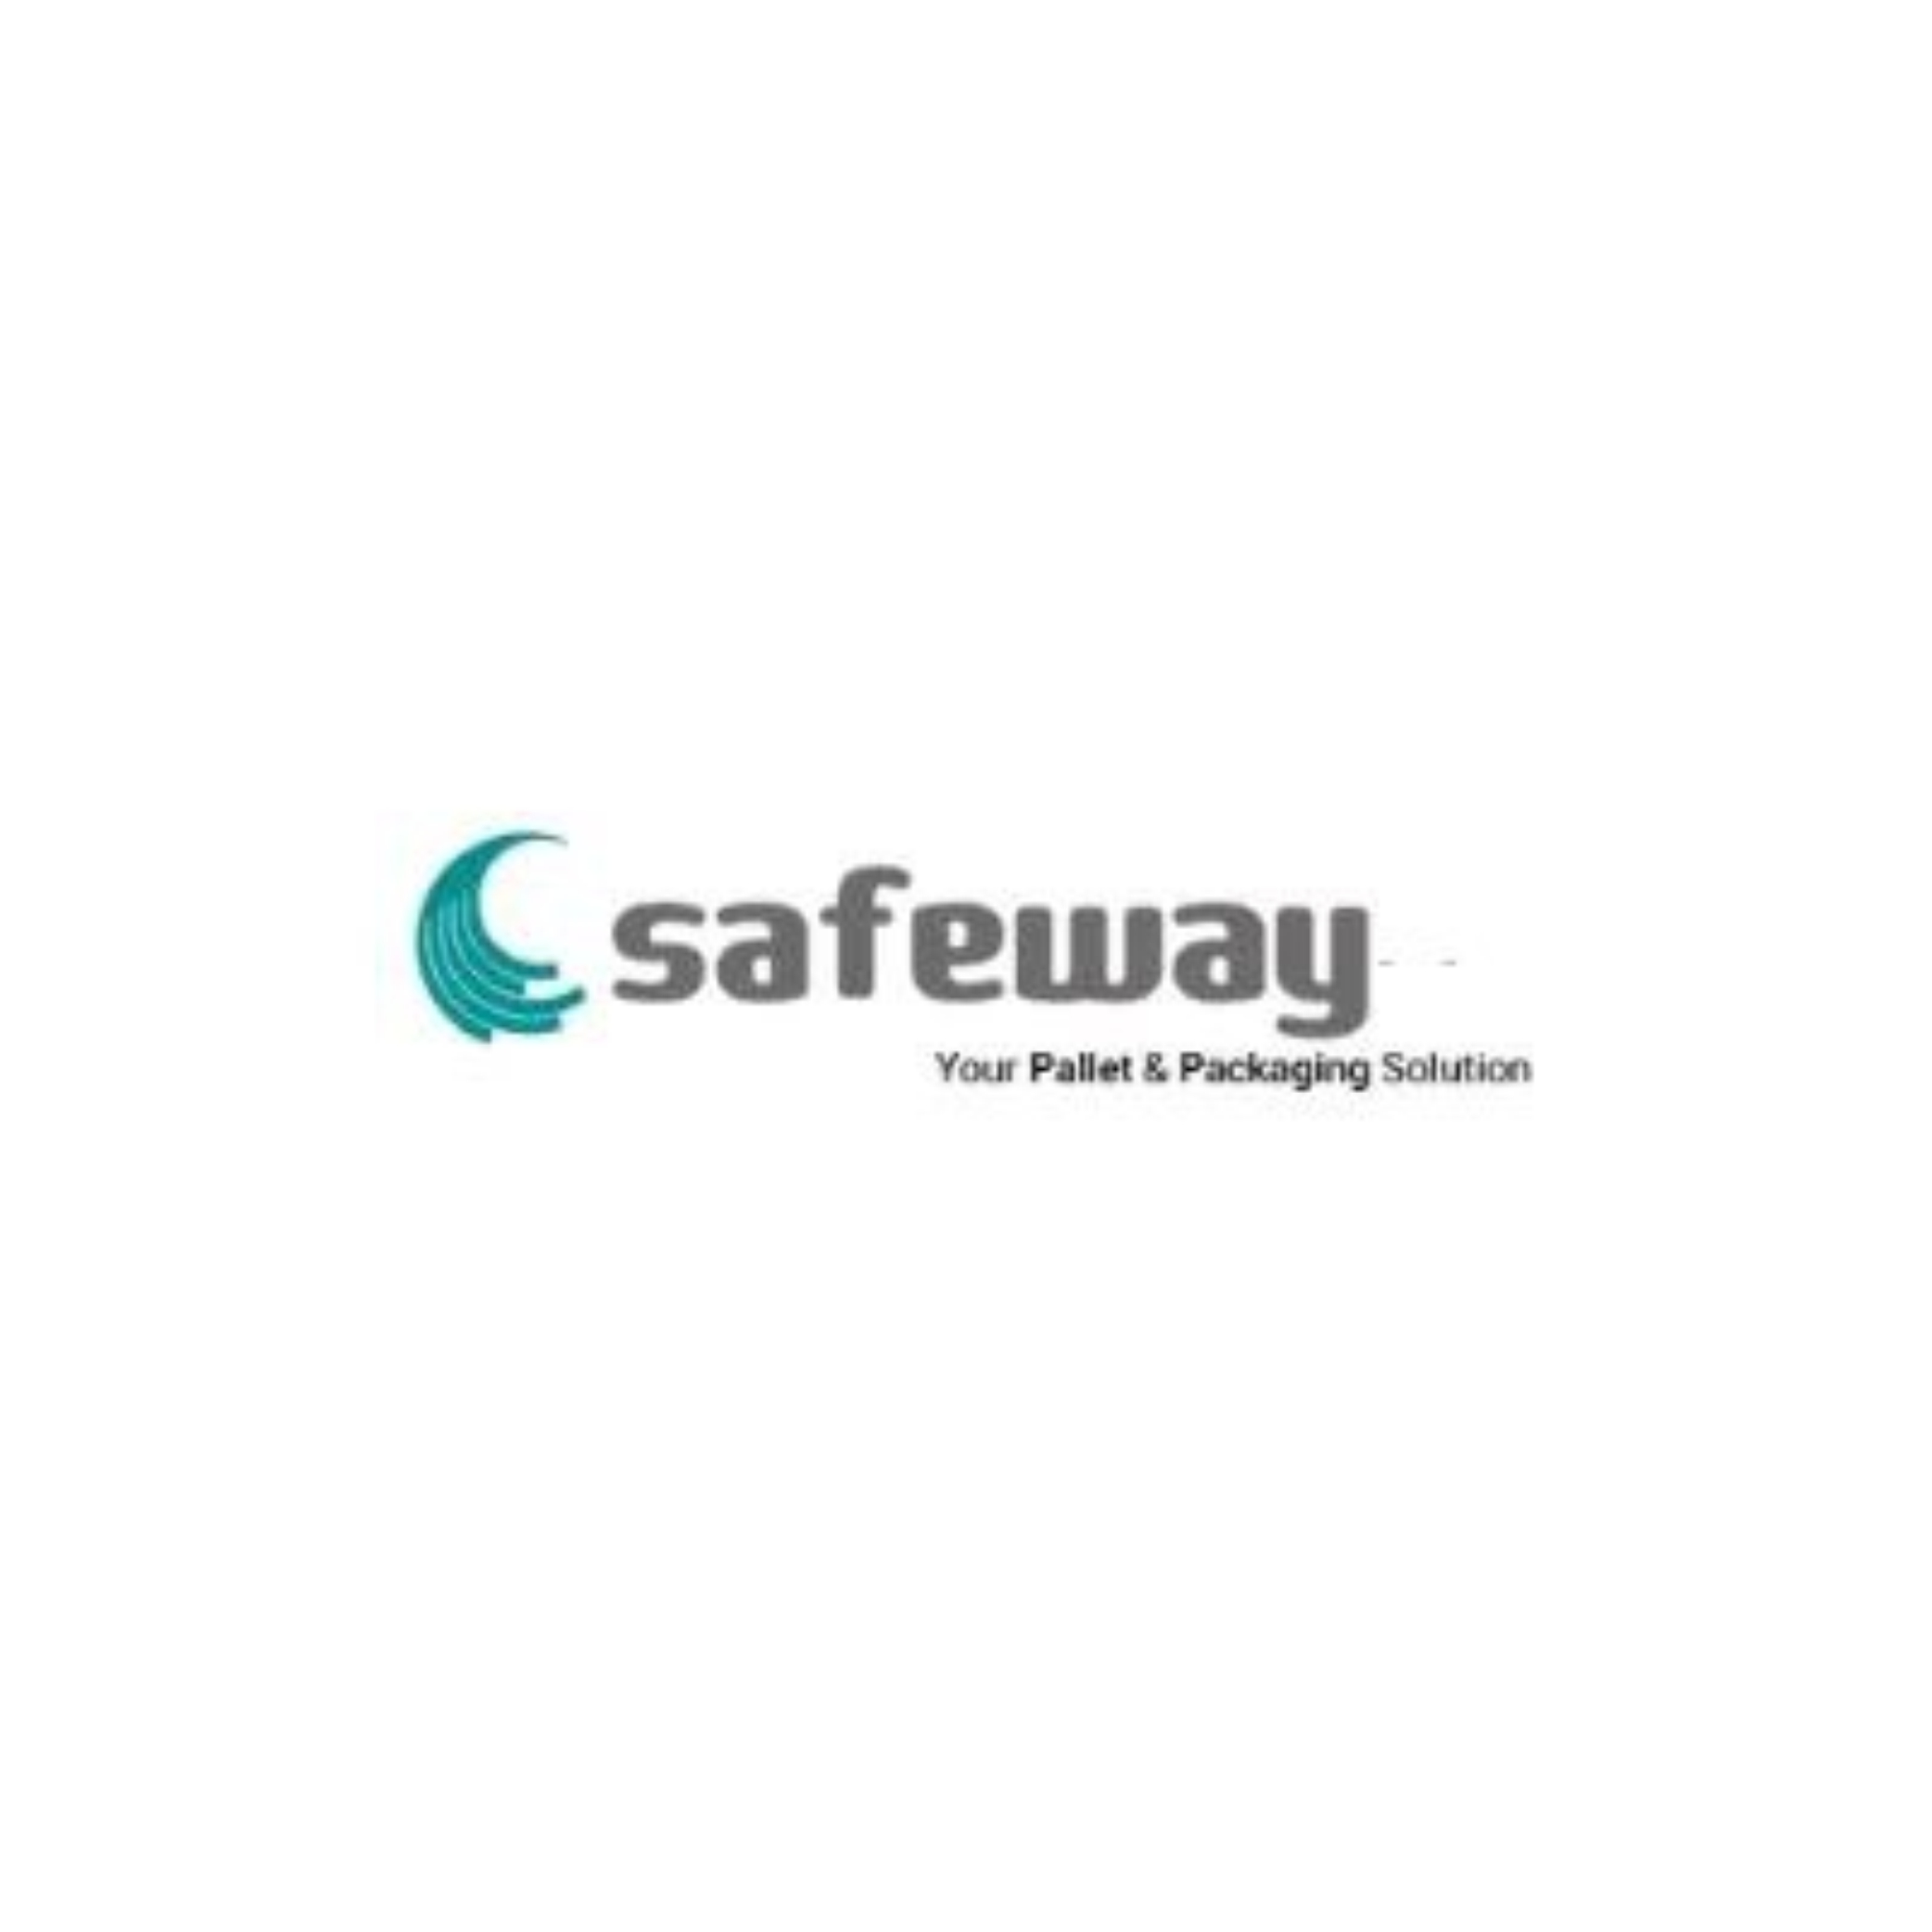 Safeway Group Indonesia